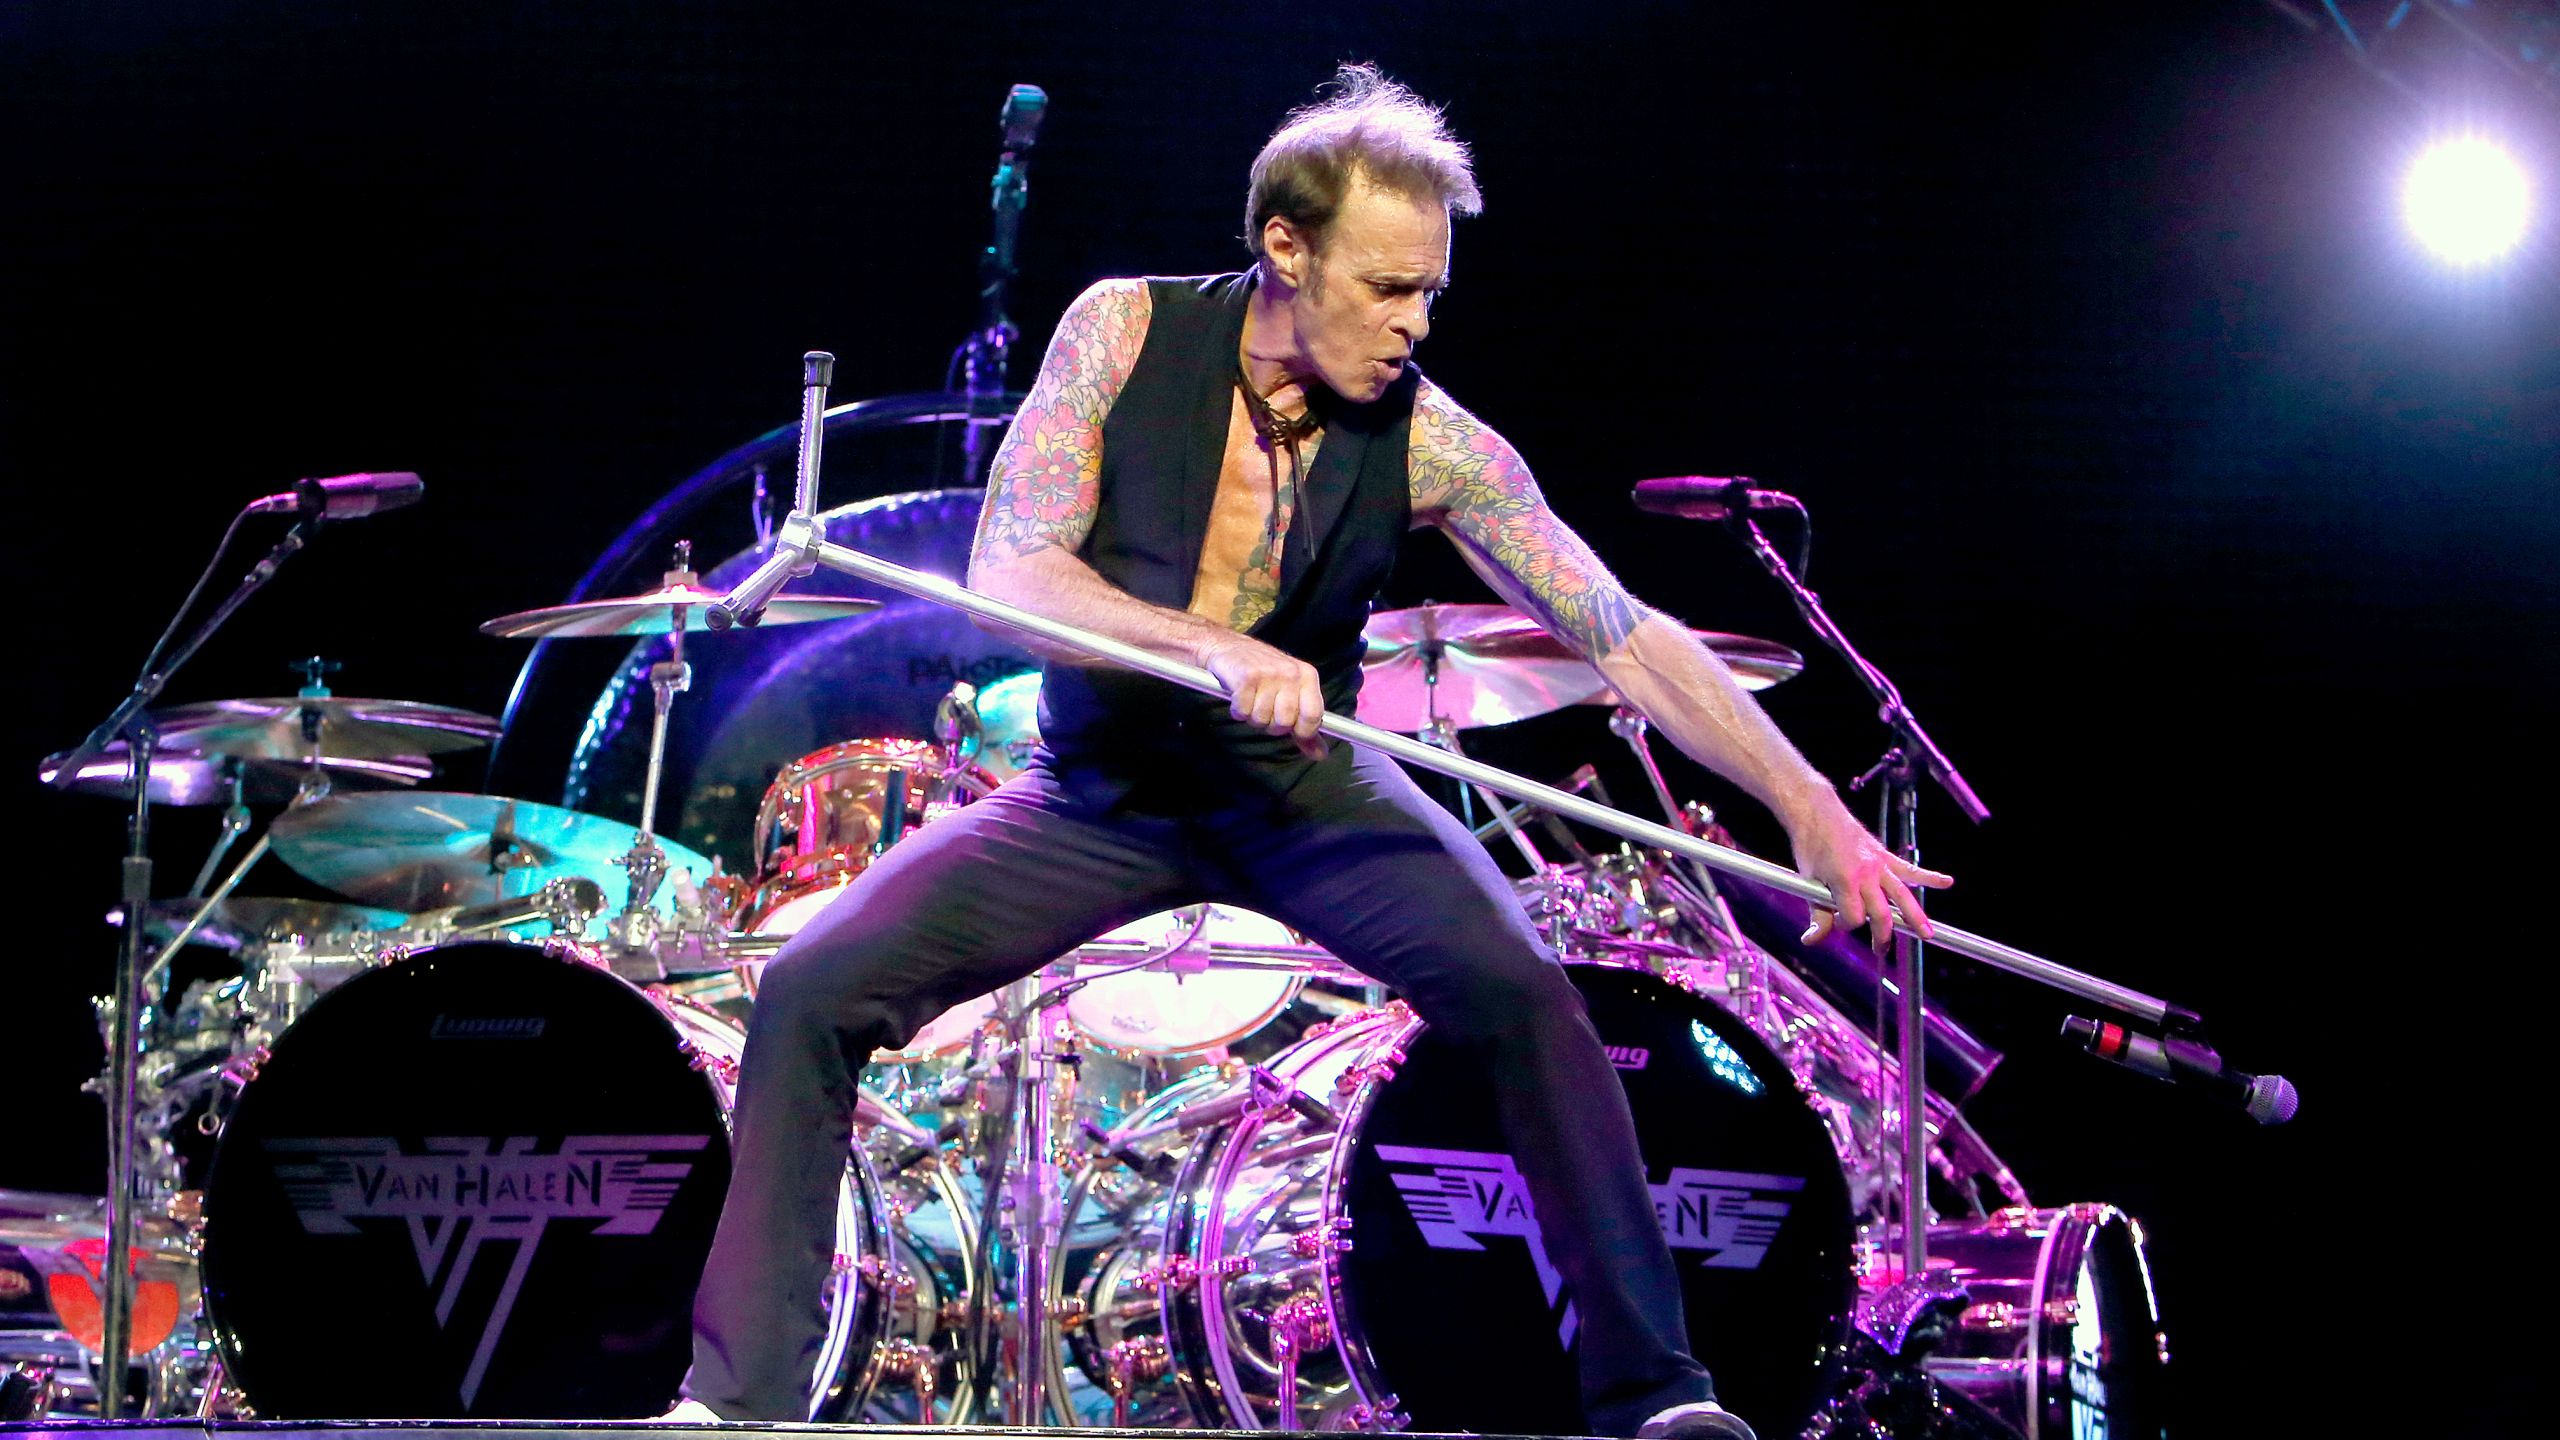 David Lee Roth is joining farewell tour .centralillinoisproud.com